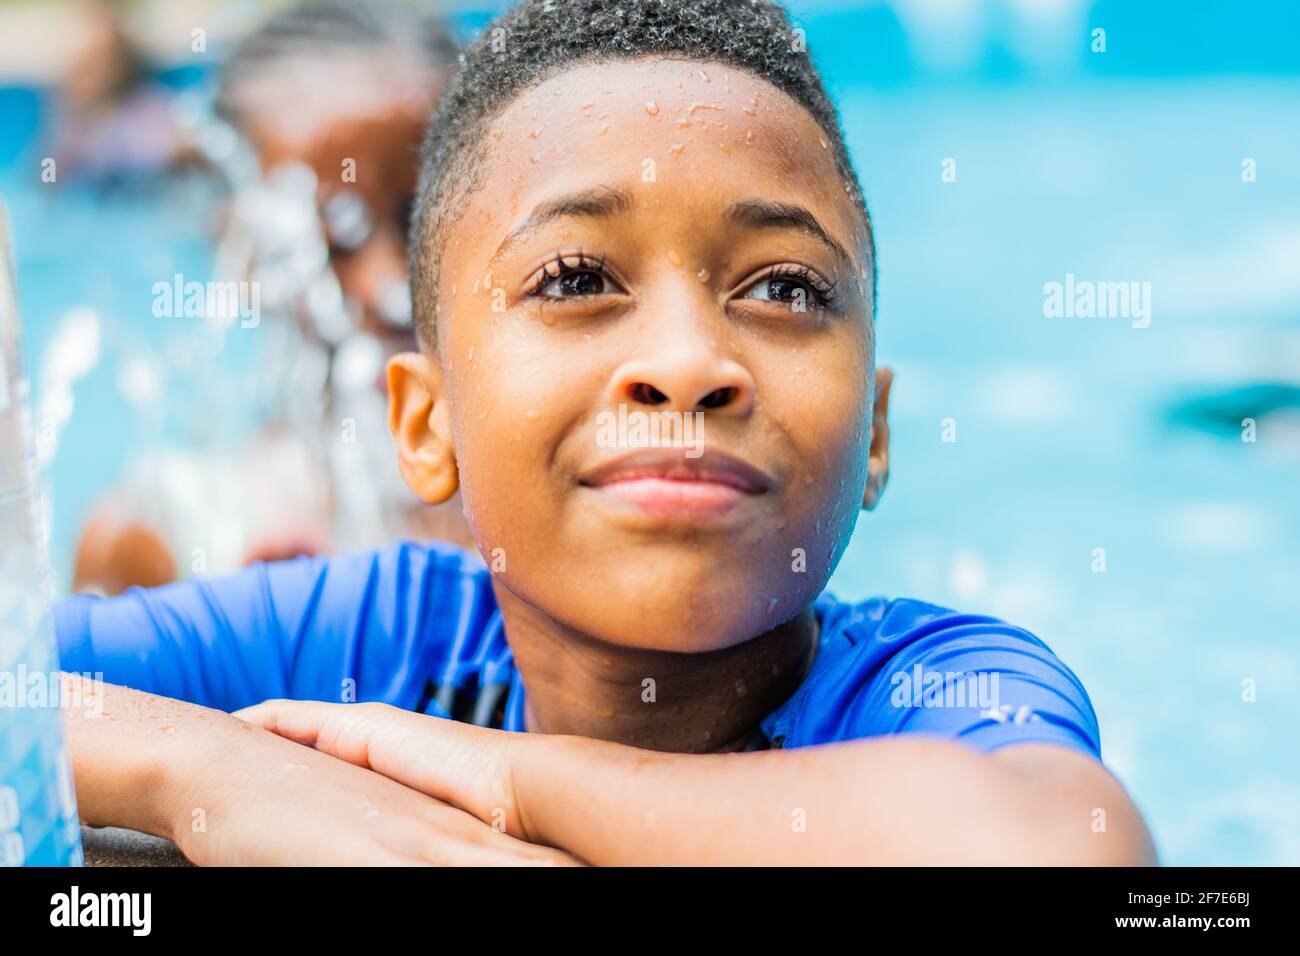 Portrait of an African American boy in pool Stock Photo